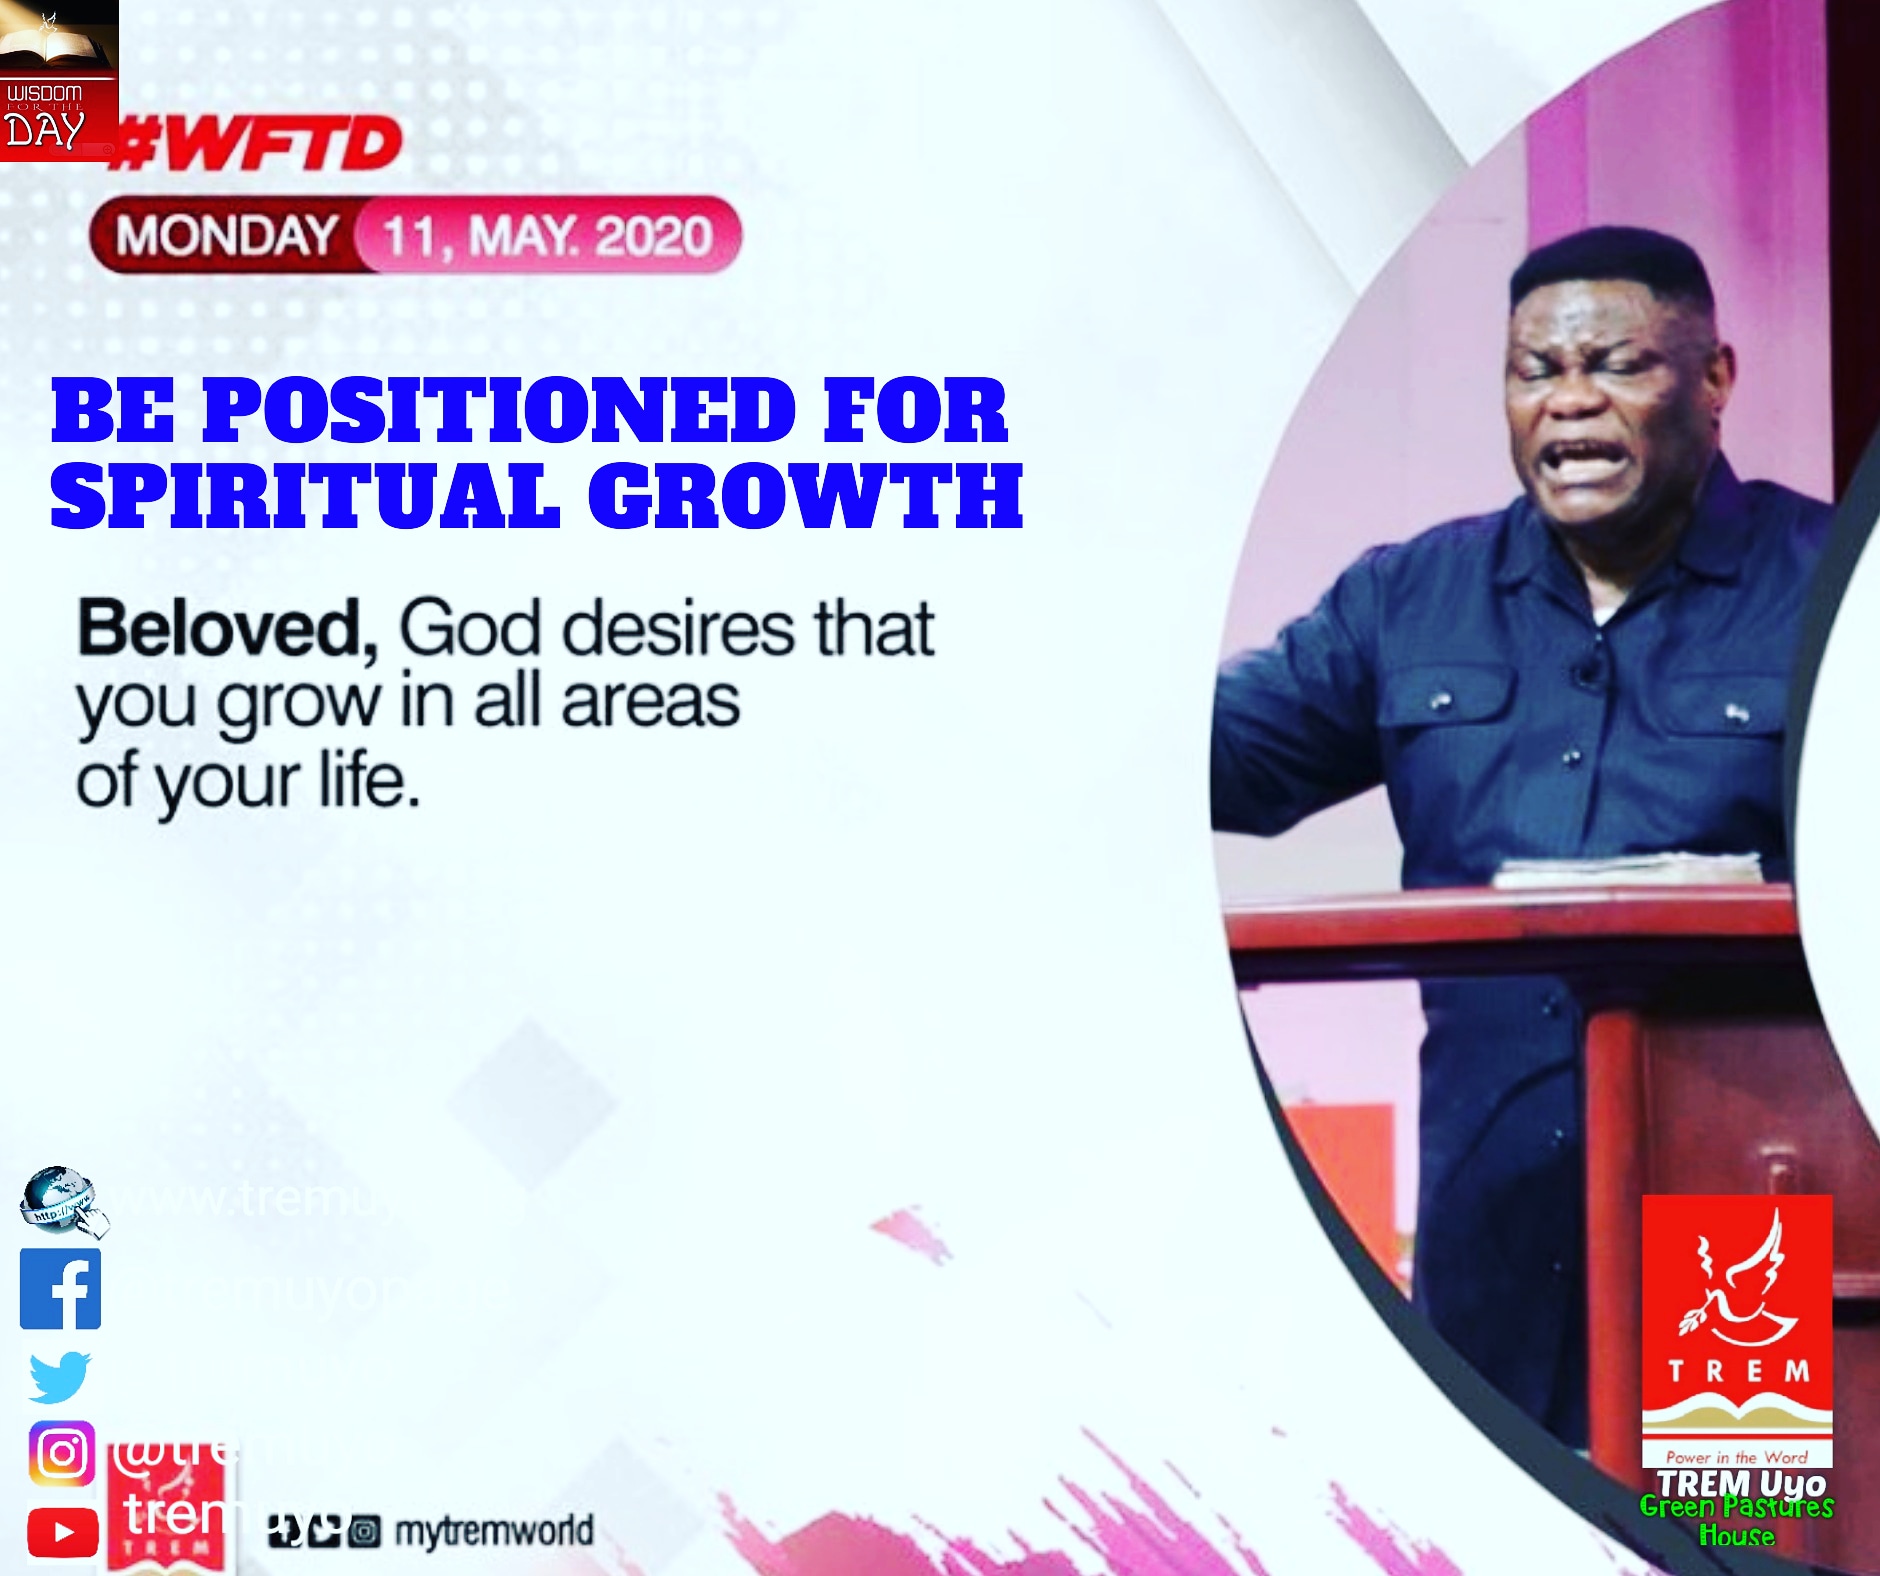 BE POSITIONED FOR SPIRITUAL GROWTH